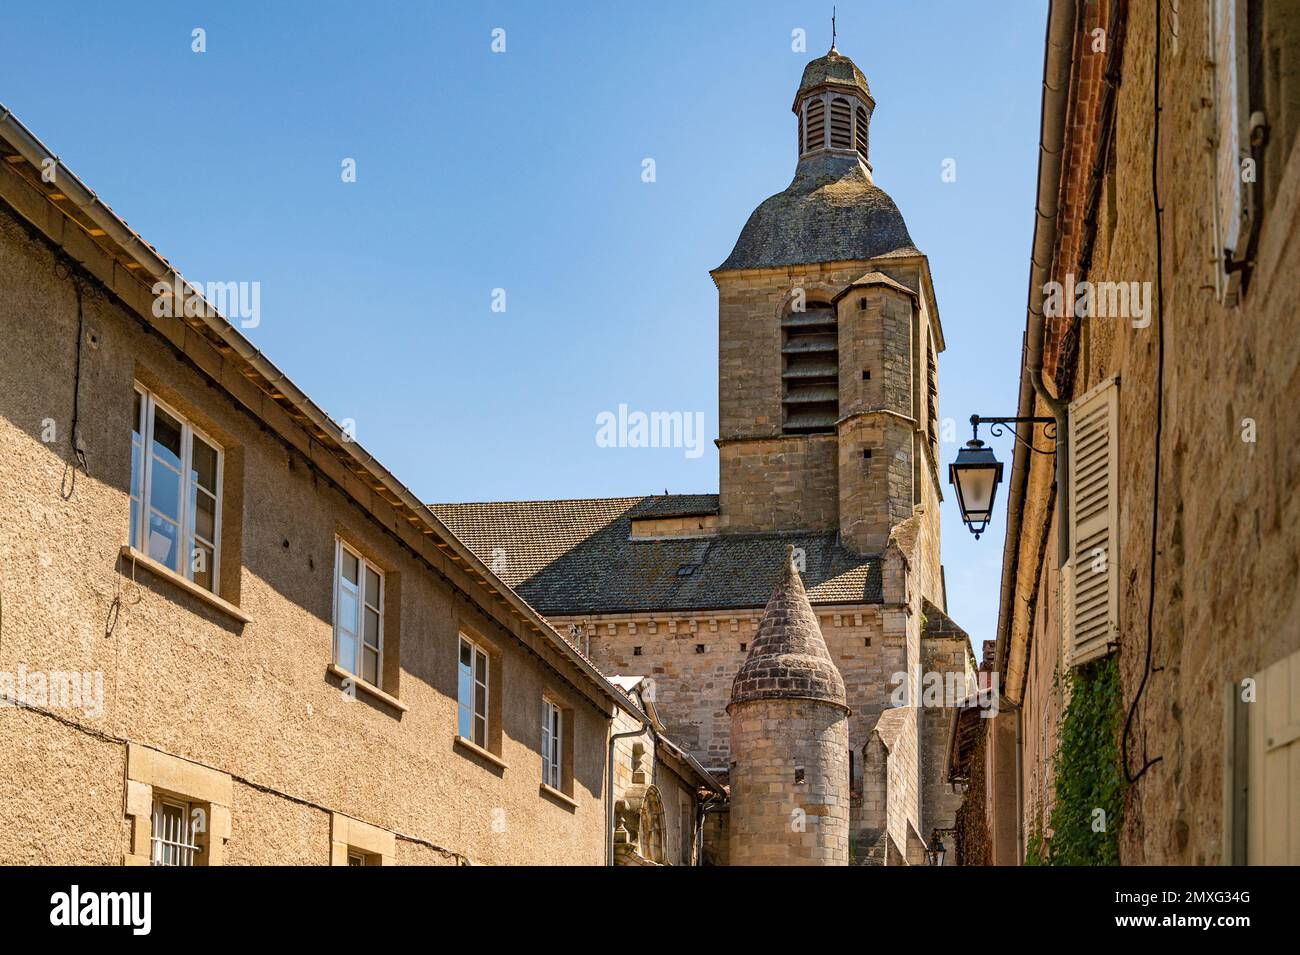 The tower of the church église Notre-Dame du Puy in Figeac, southern France Stock Photo